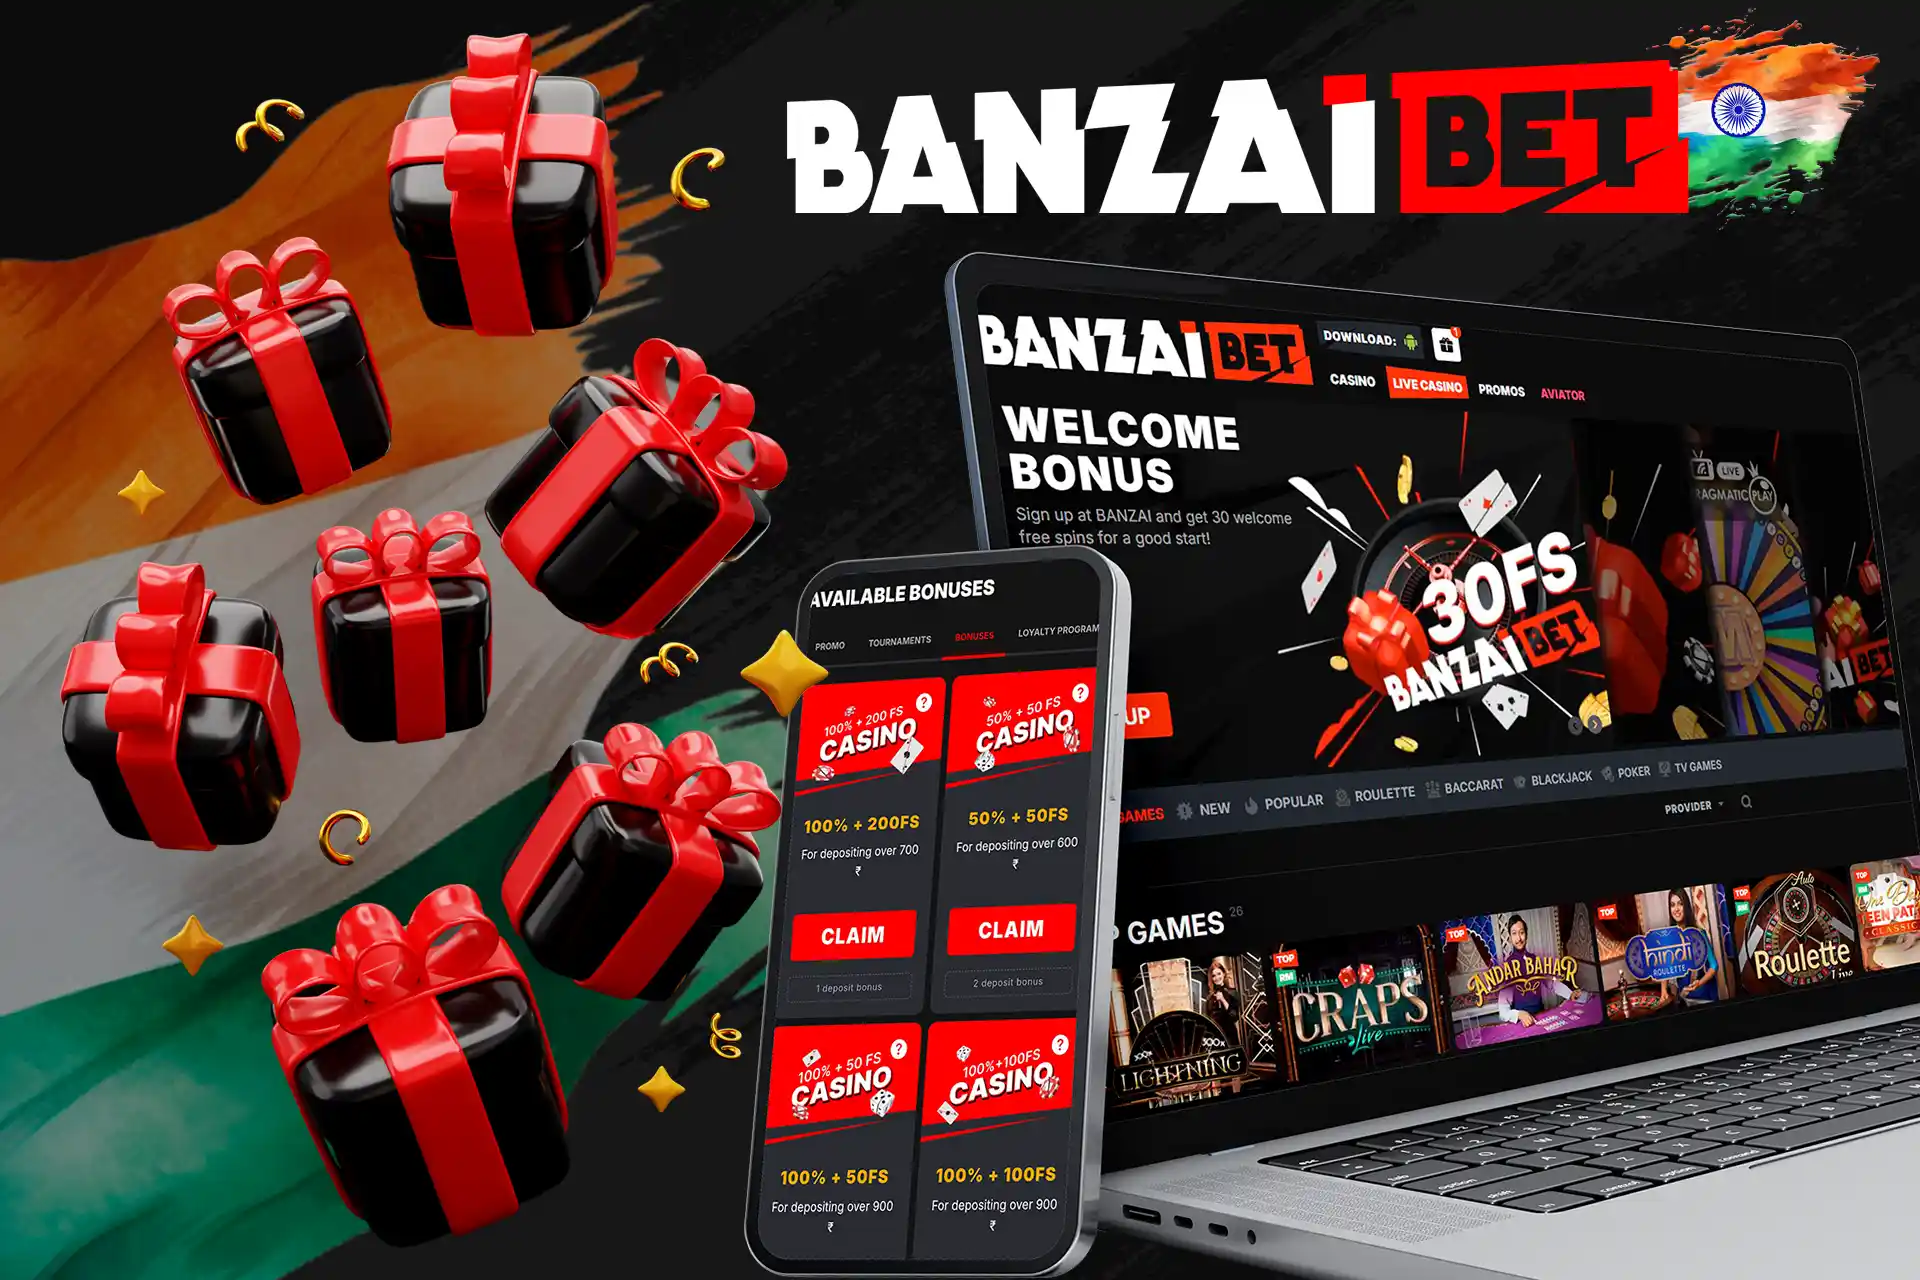 Create an account at Banzaibet India and don’t miss the chance to get nice bonuses